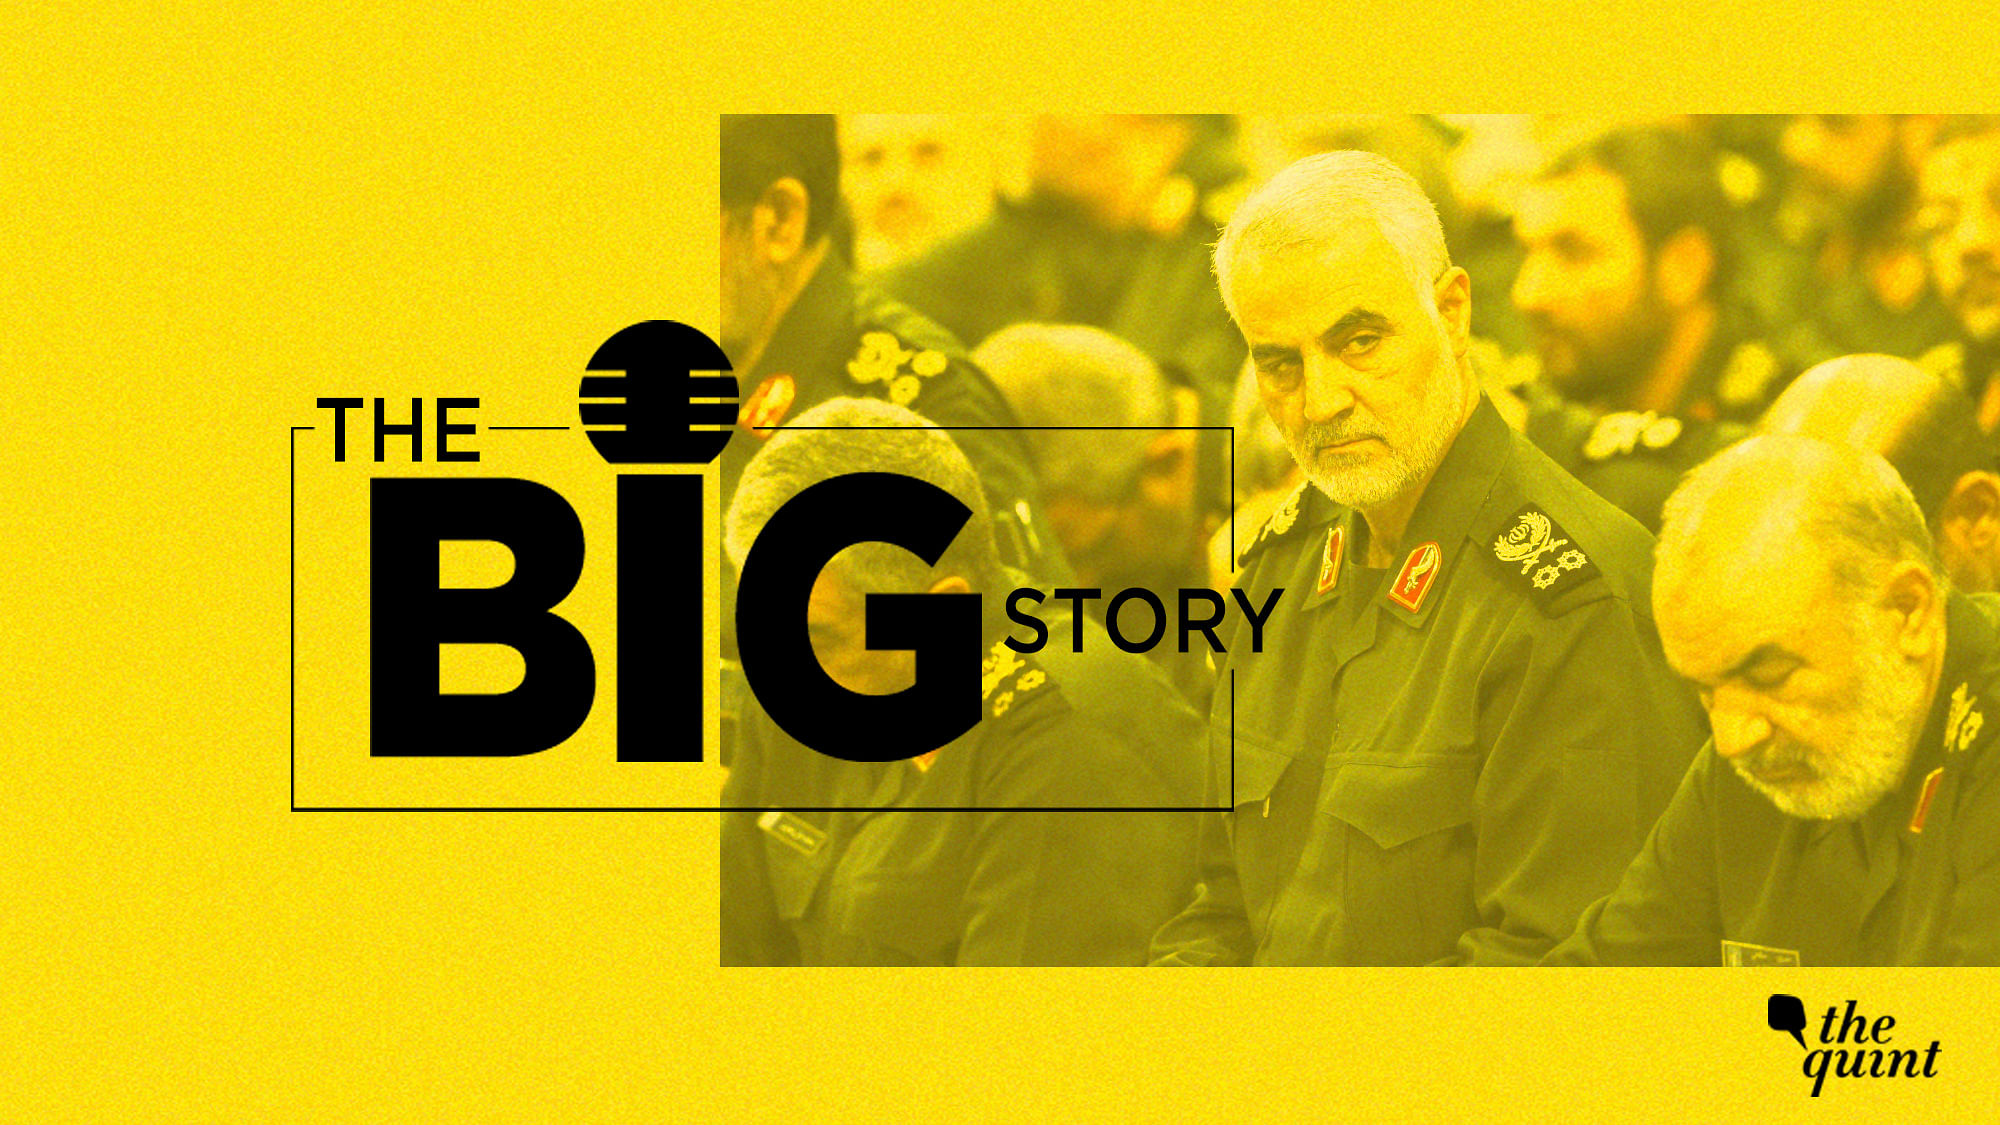 The United States confirmed that they killed General Qasem Soleimani, the head of Iran’s elite Islamic Revolutionary Guard Corps’ Quds Force, in an air raid at Baghdad’s international airport in Iraq, on 2 January.&nbsp;